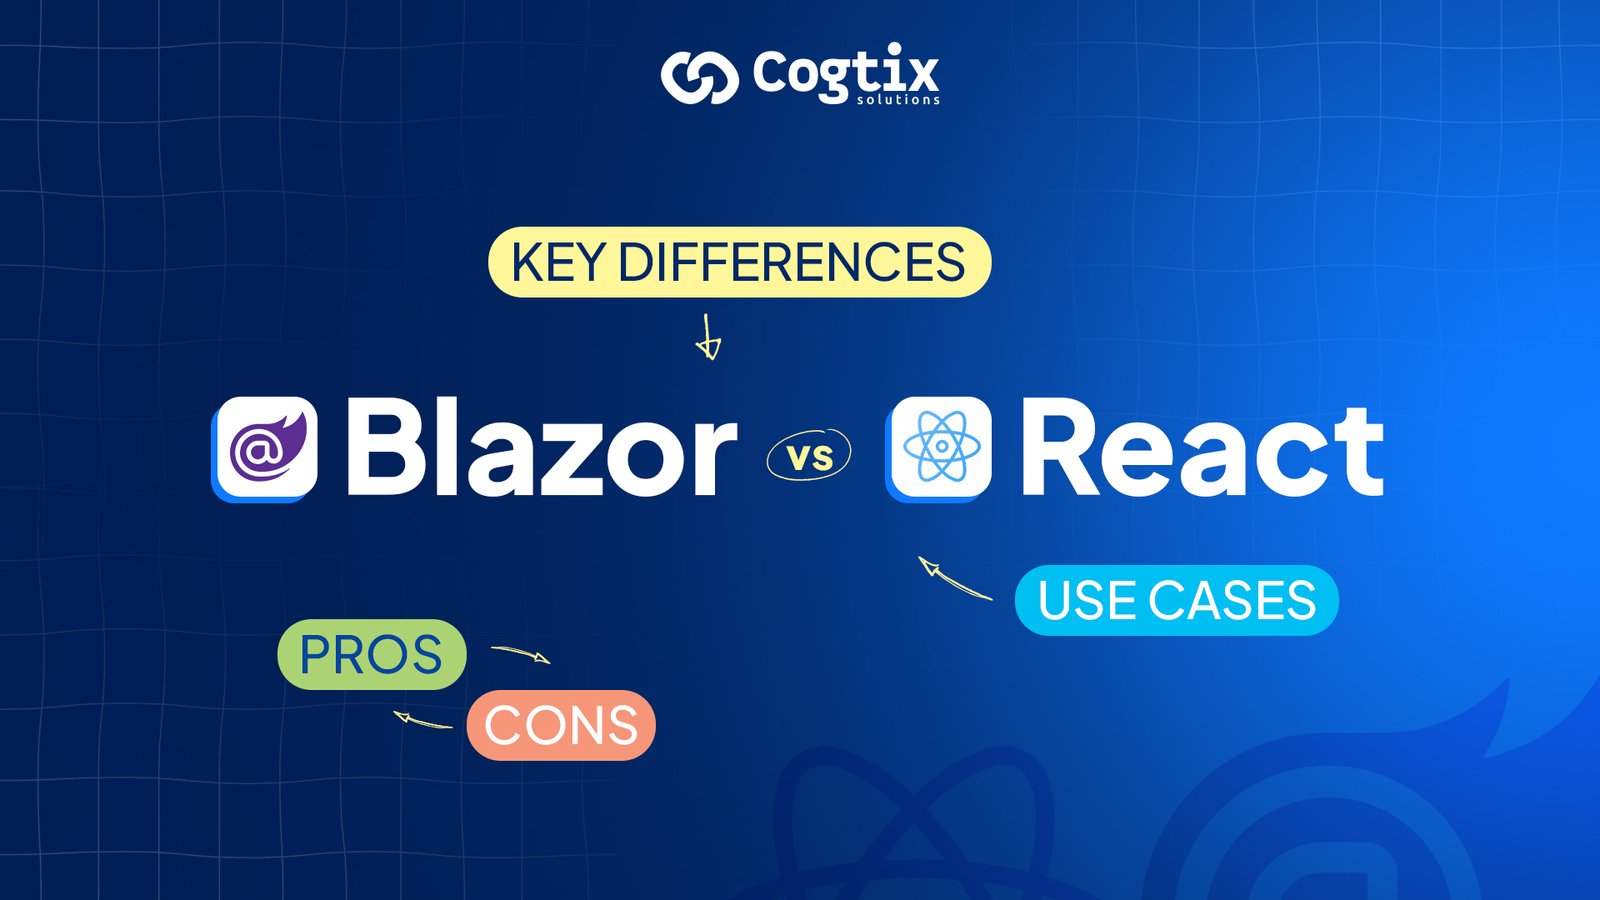 Blazor vs React: What to Choose for Your Project